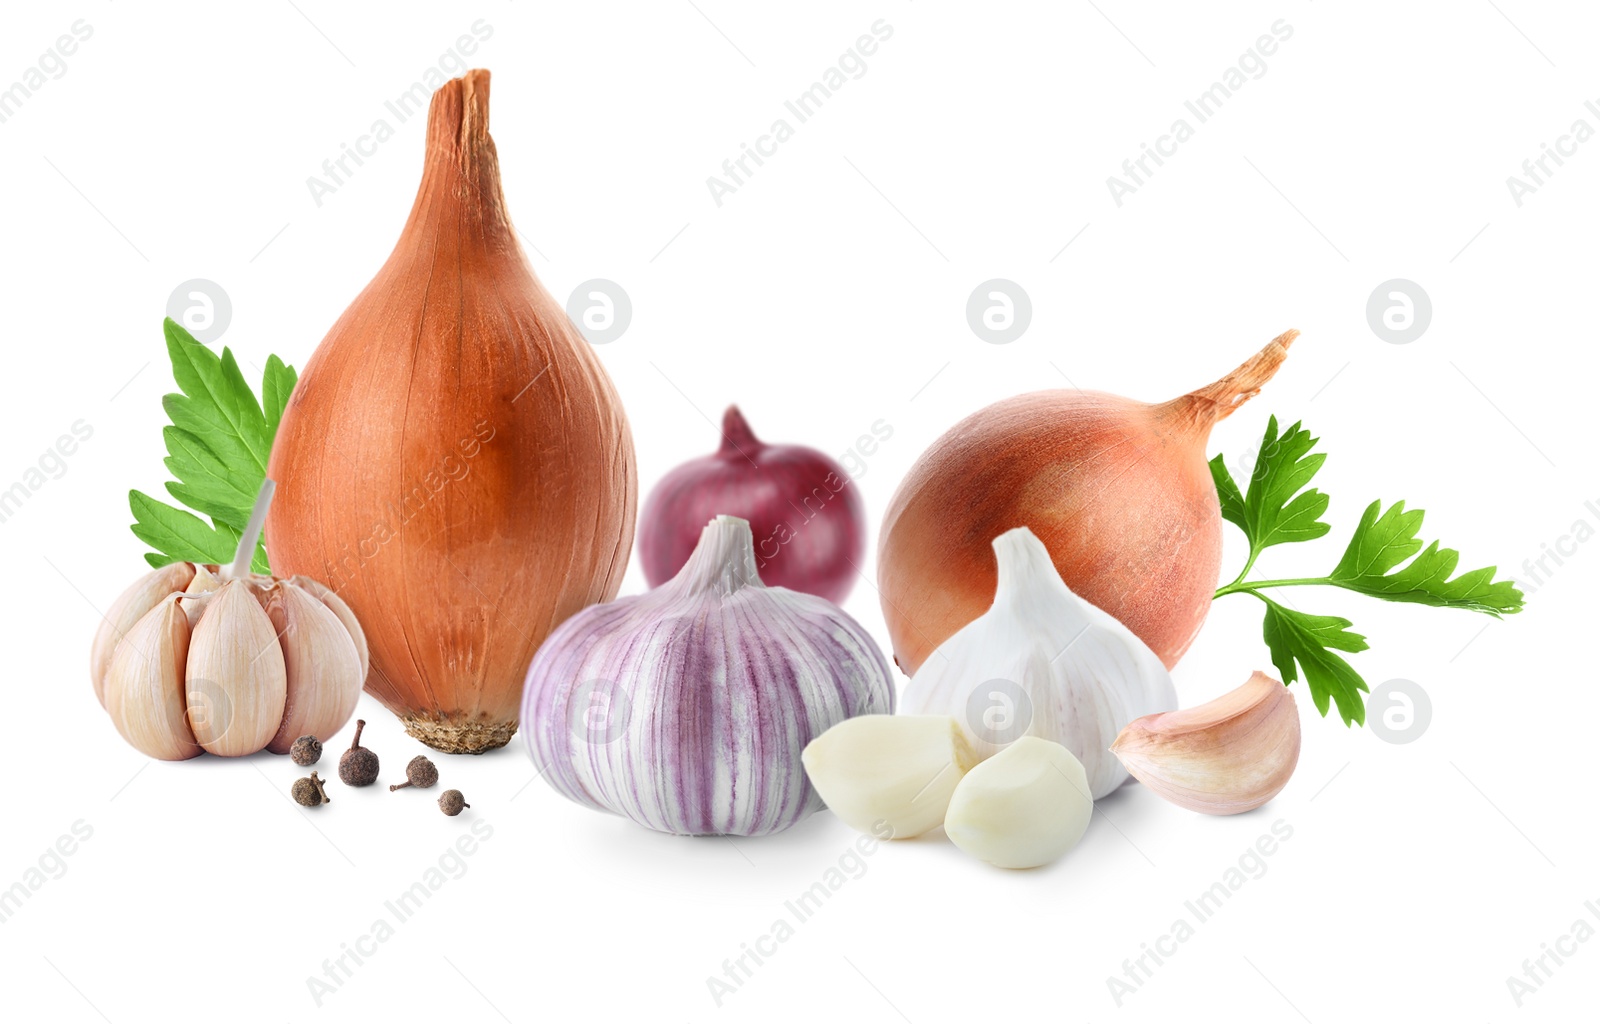 Image of Mix of fresh garlic and onions on white background